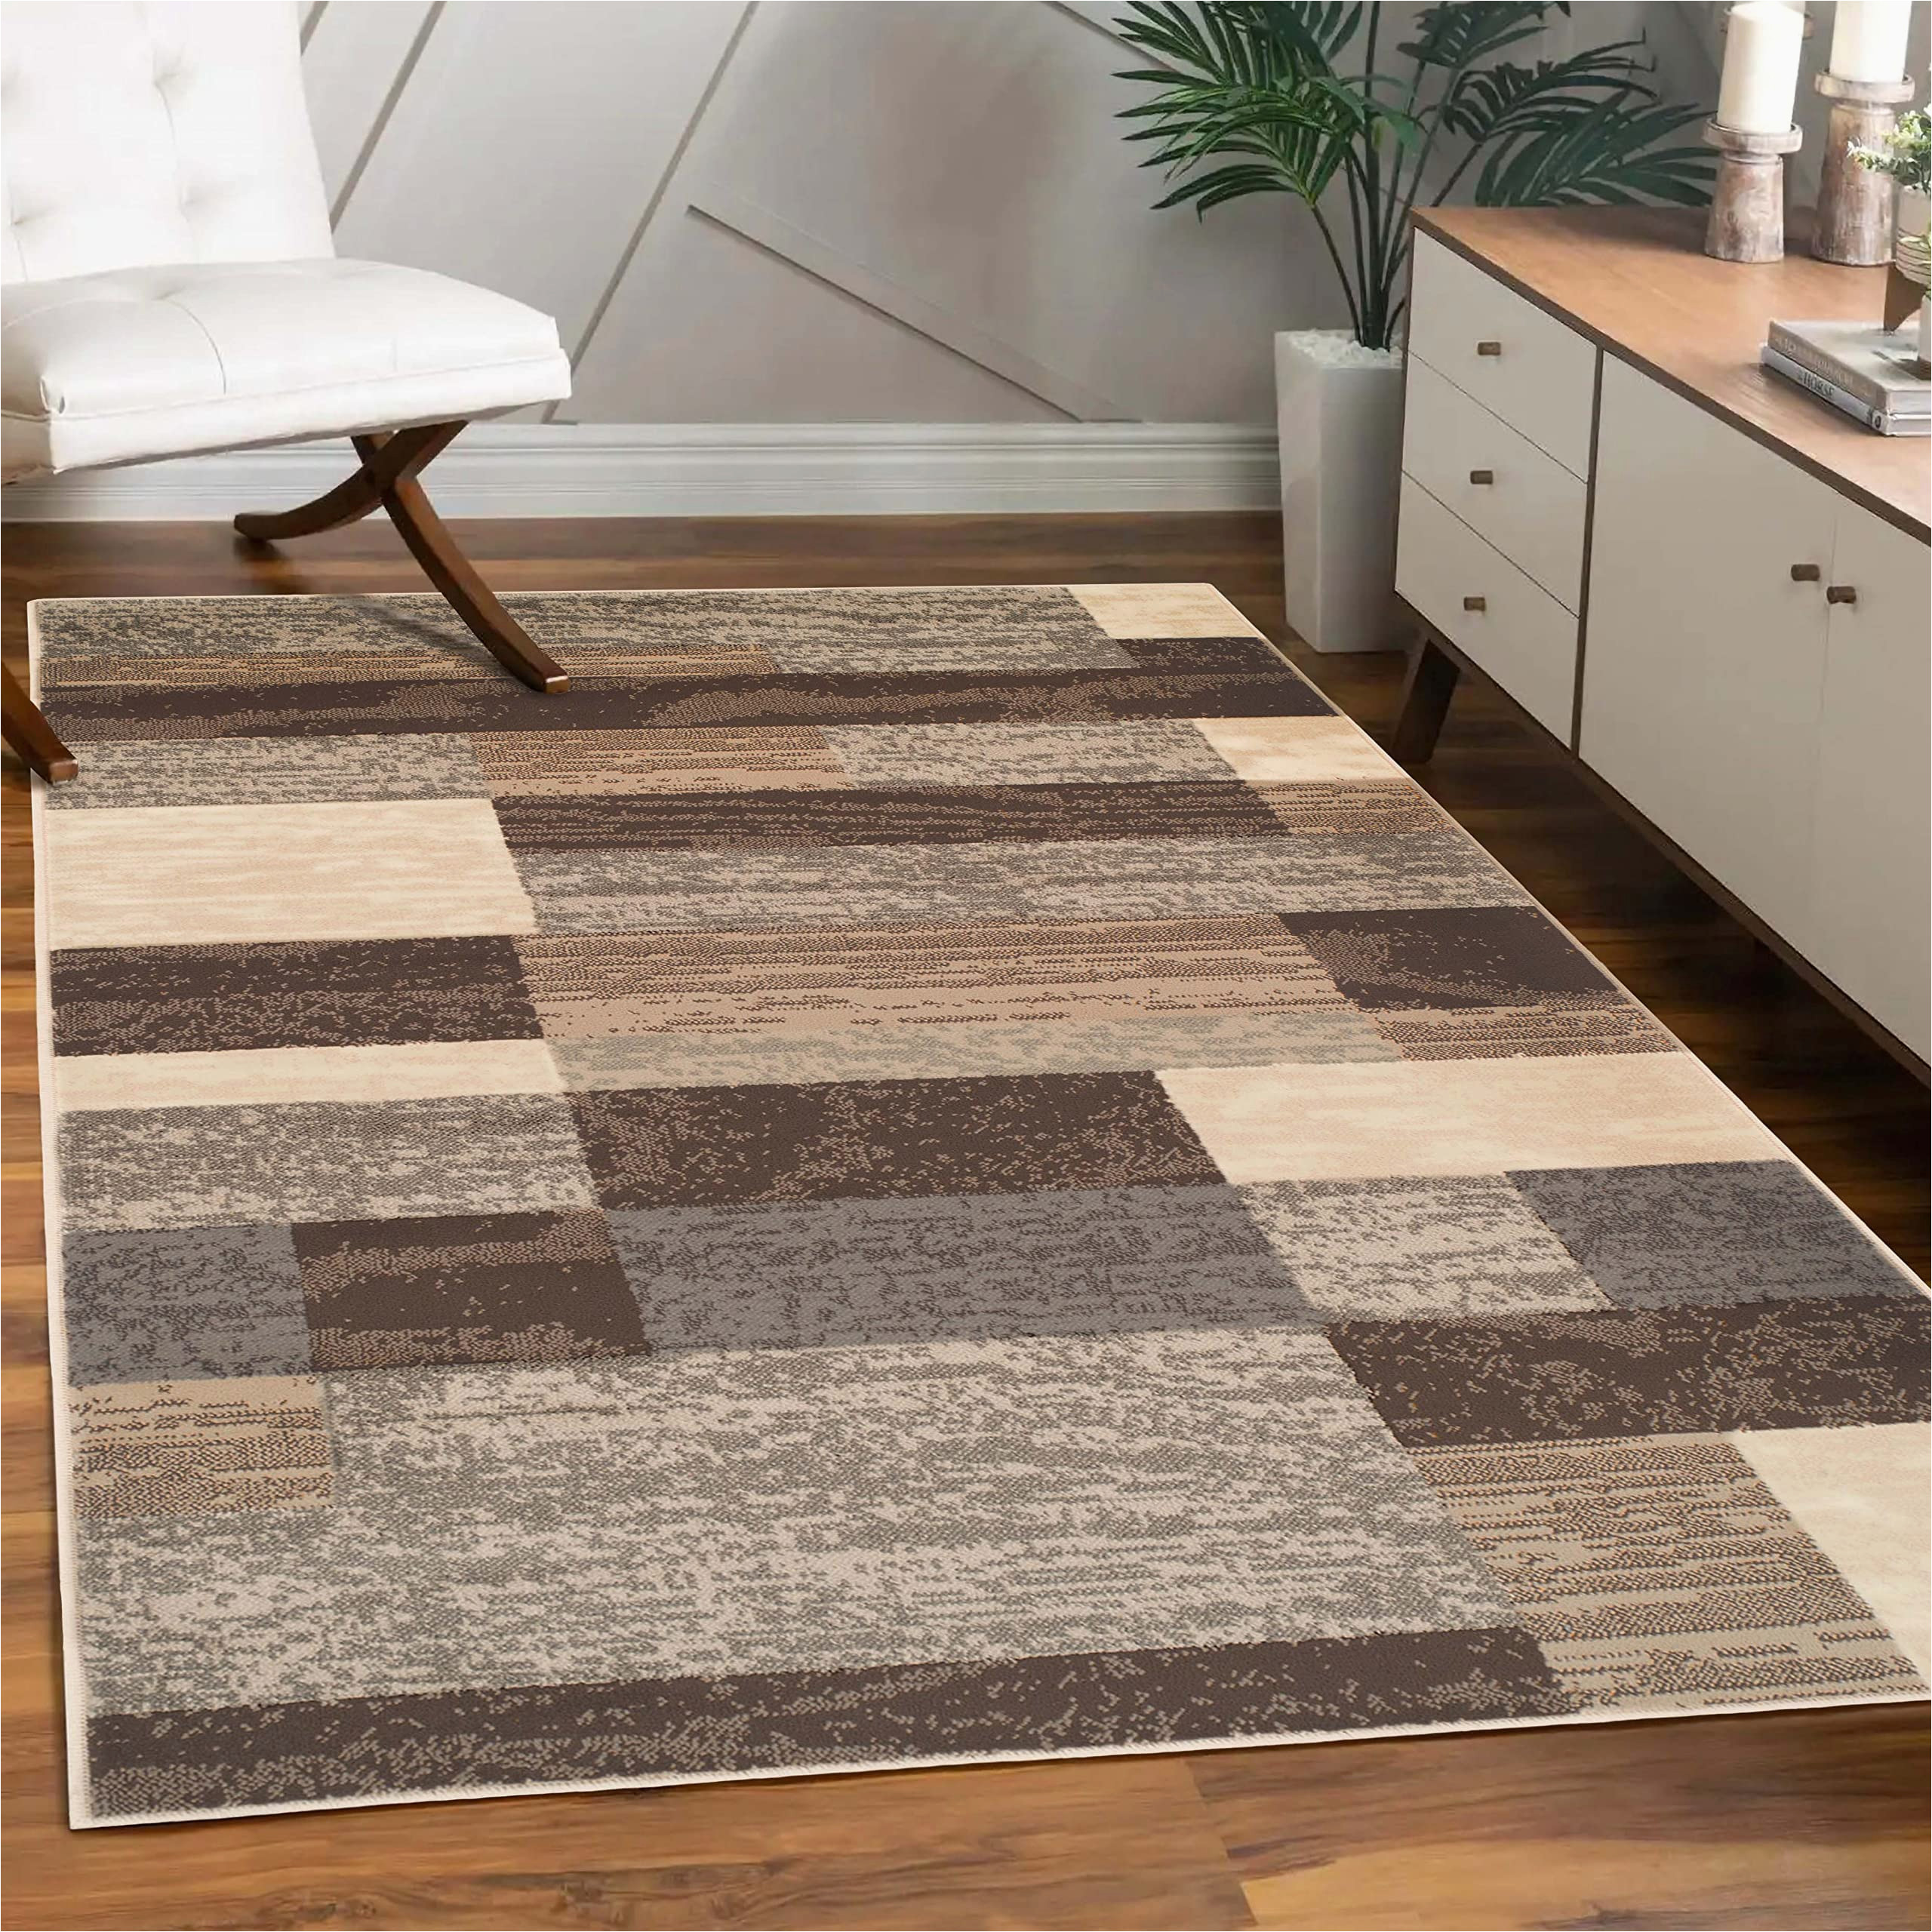 Backing for area Rugs On Hardwood Floors Superior Indoor Small area Rug with Jute Backing for Bedroom, Dorm, Living Room, Entryway, Hallway, Perfect for Hardwood Floors – Rockwood Modern …